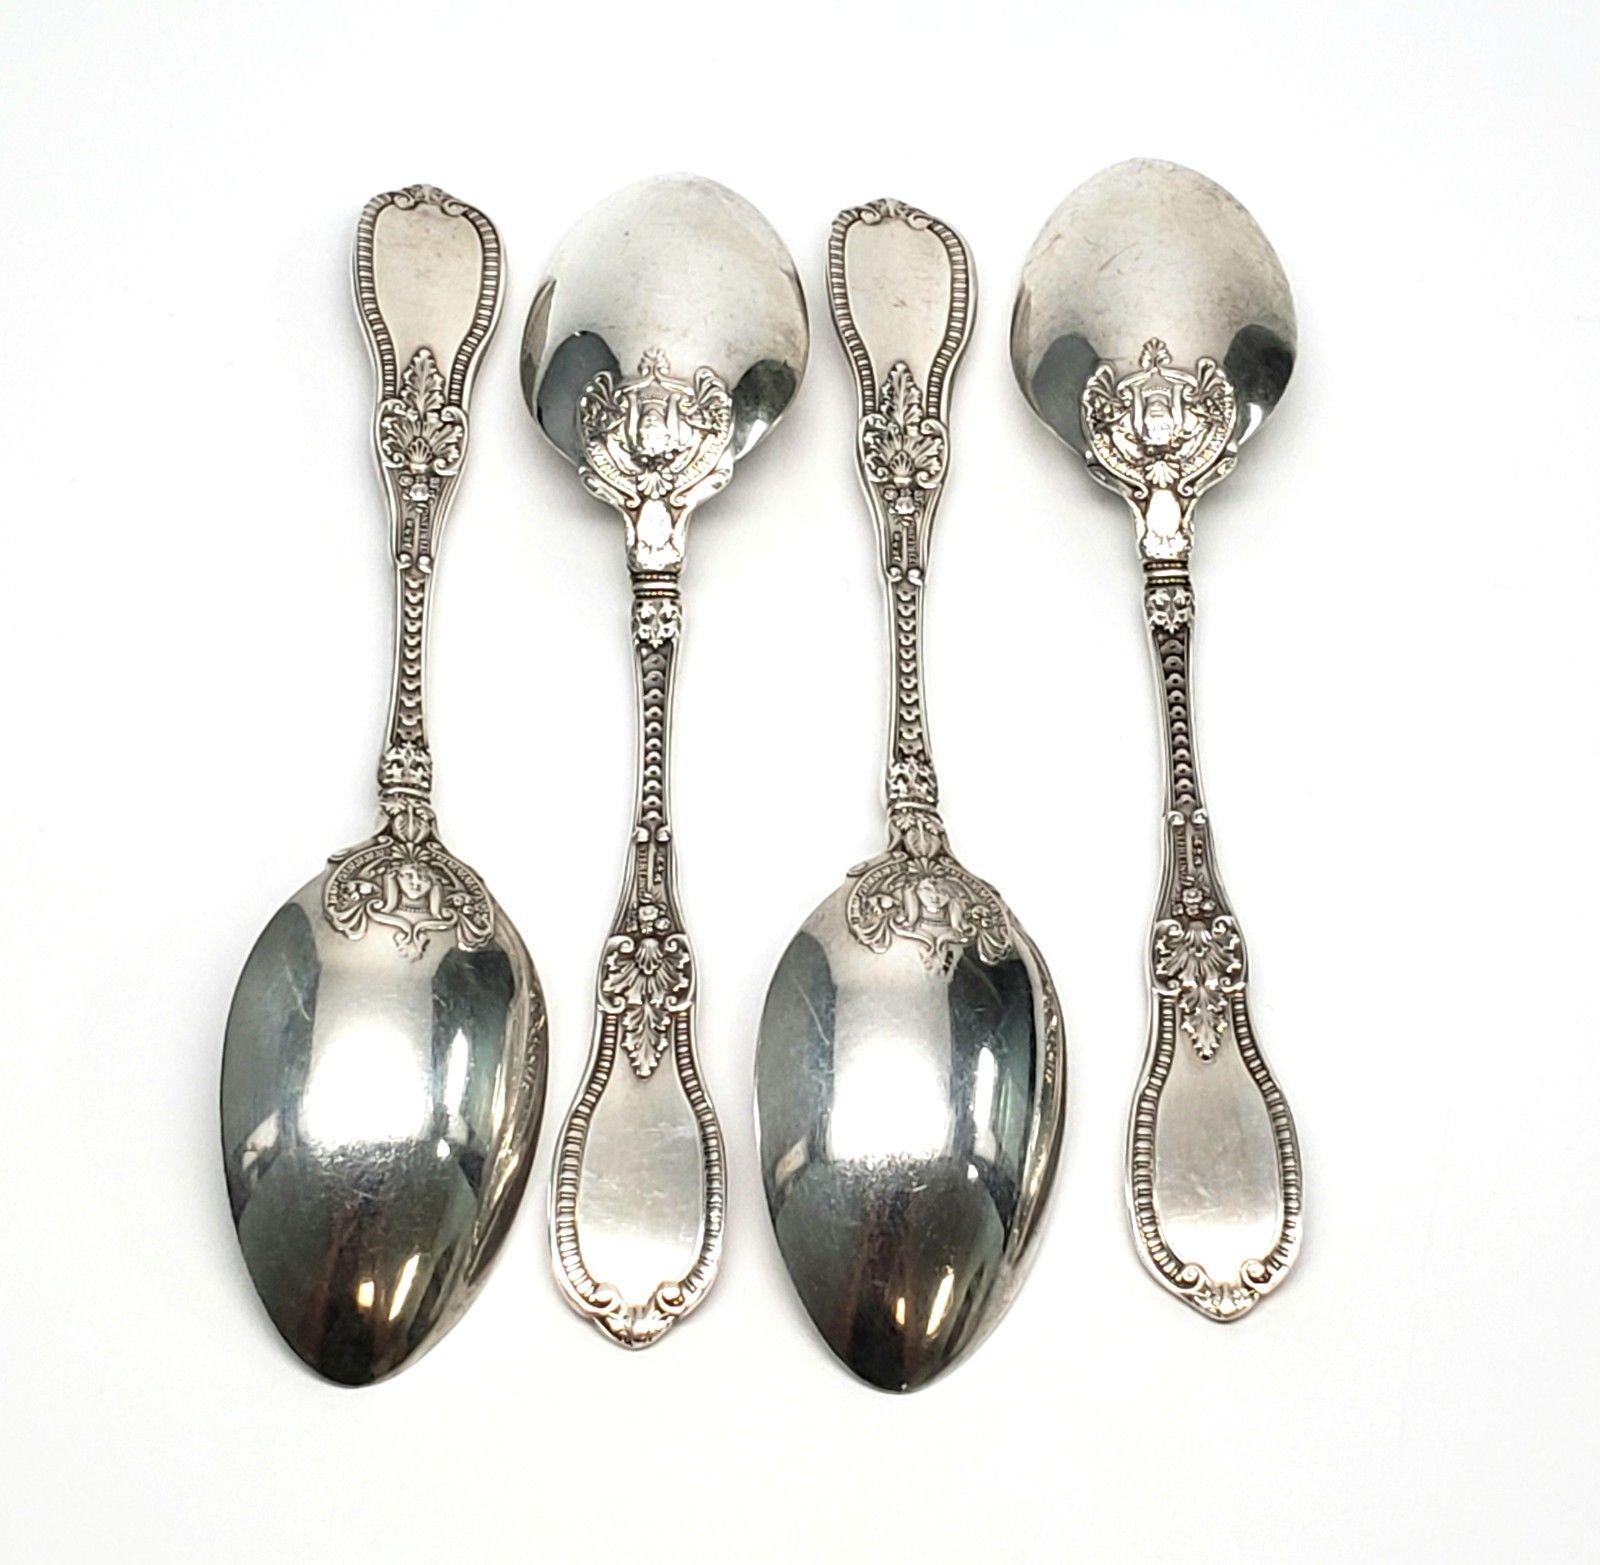 Set of 4 Gorham Mythologique sterling silver Teaspoons. Mythologique is a multiple motif pattern, this one is the bead border, with face bowl. No monogram. Measures approx 5 7/8